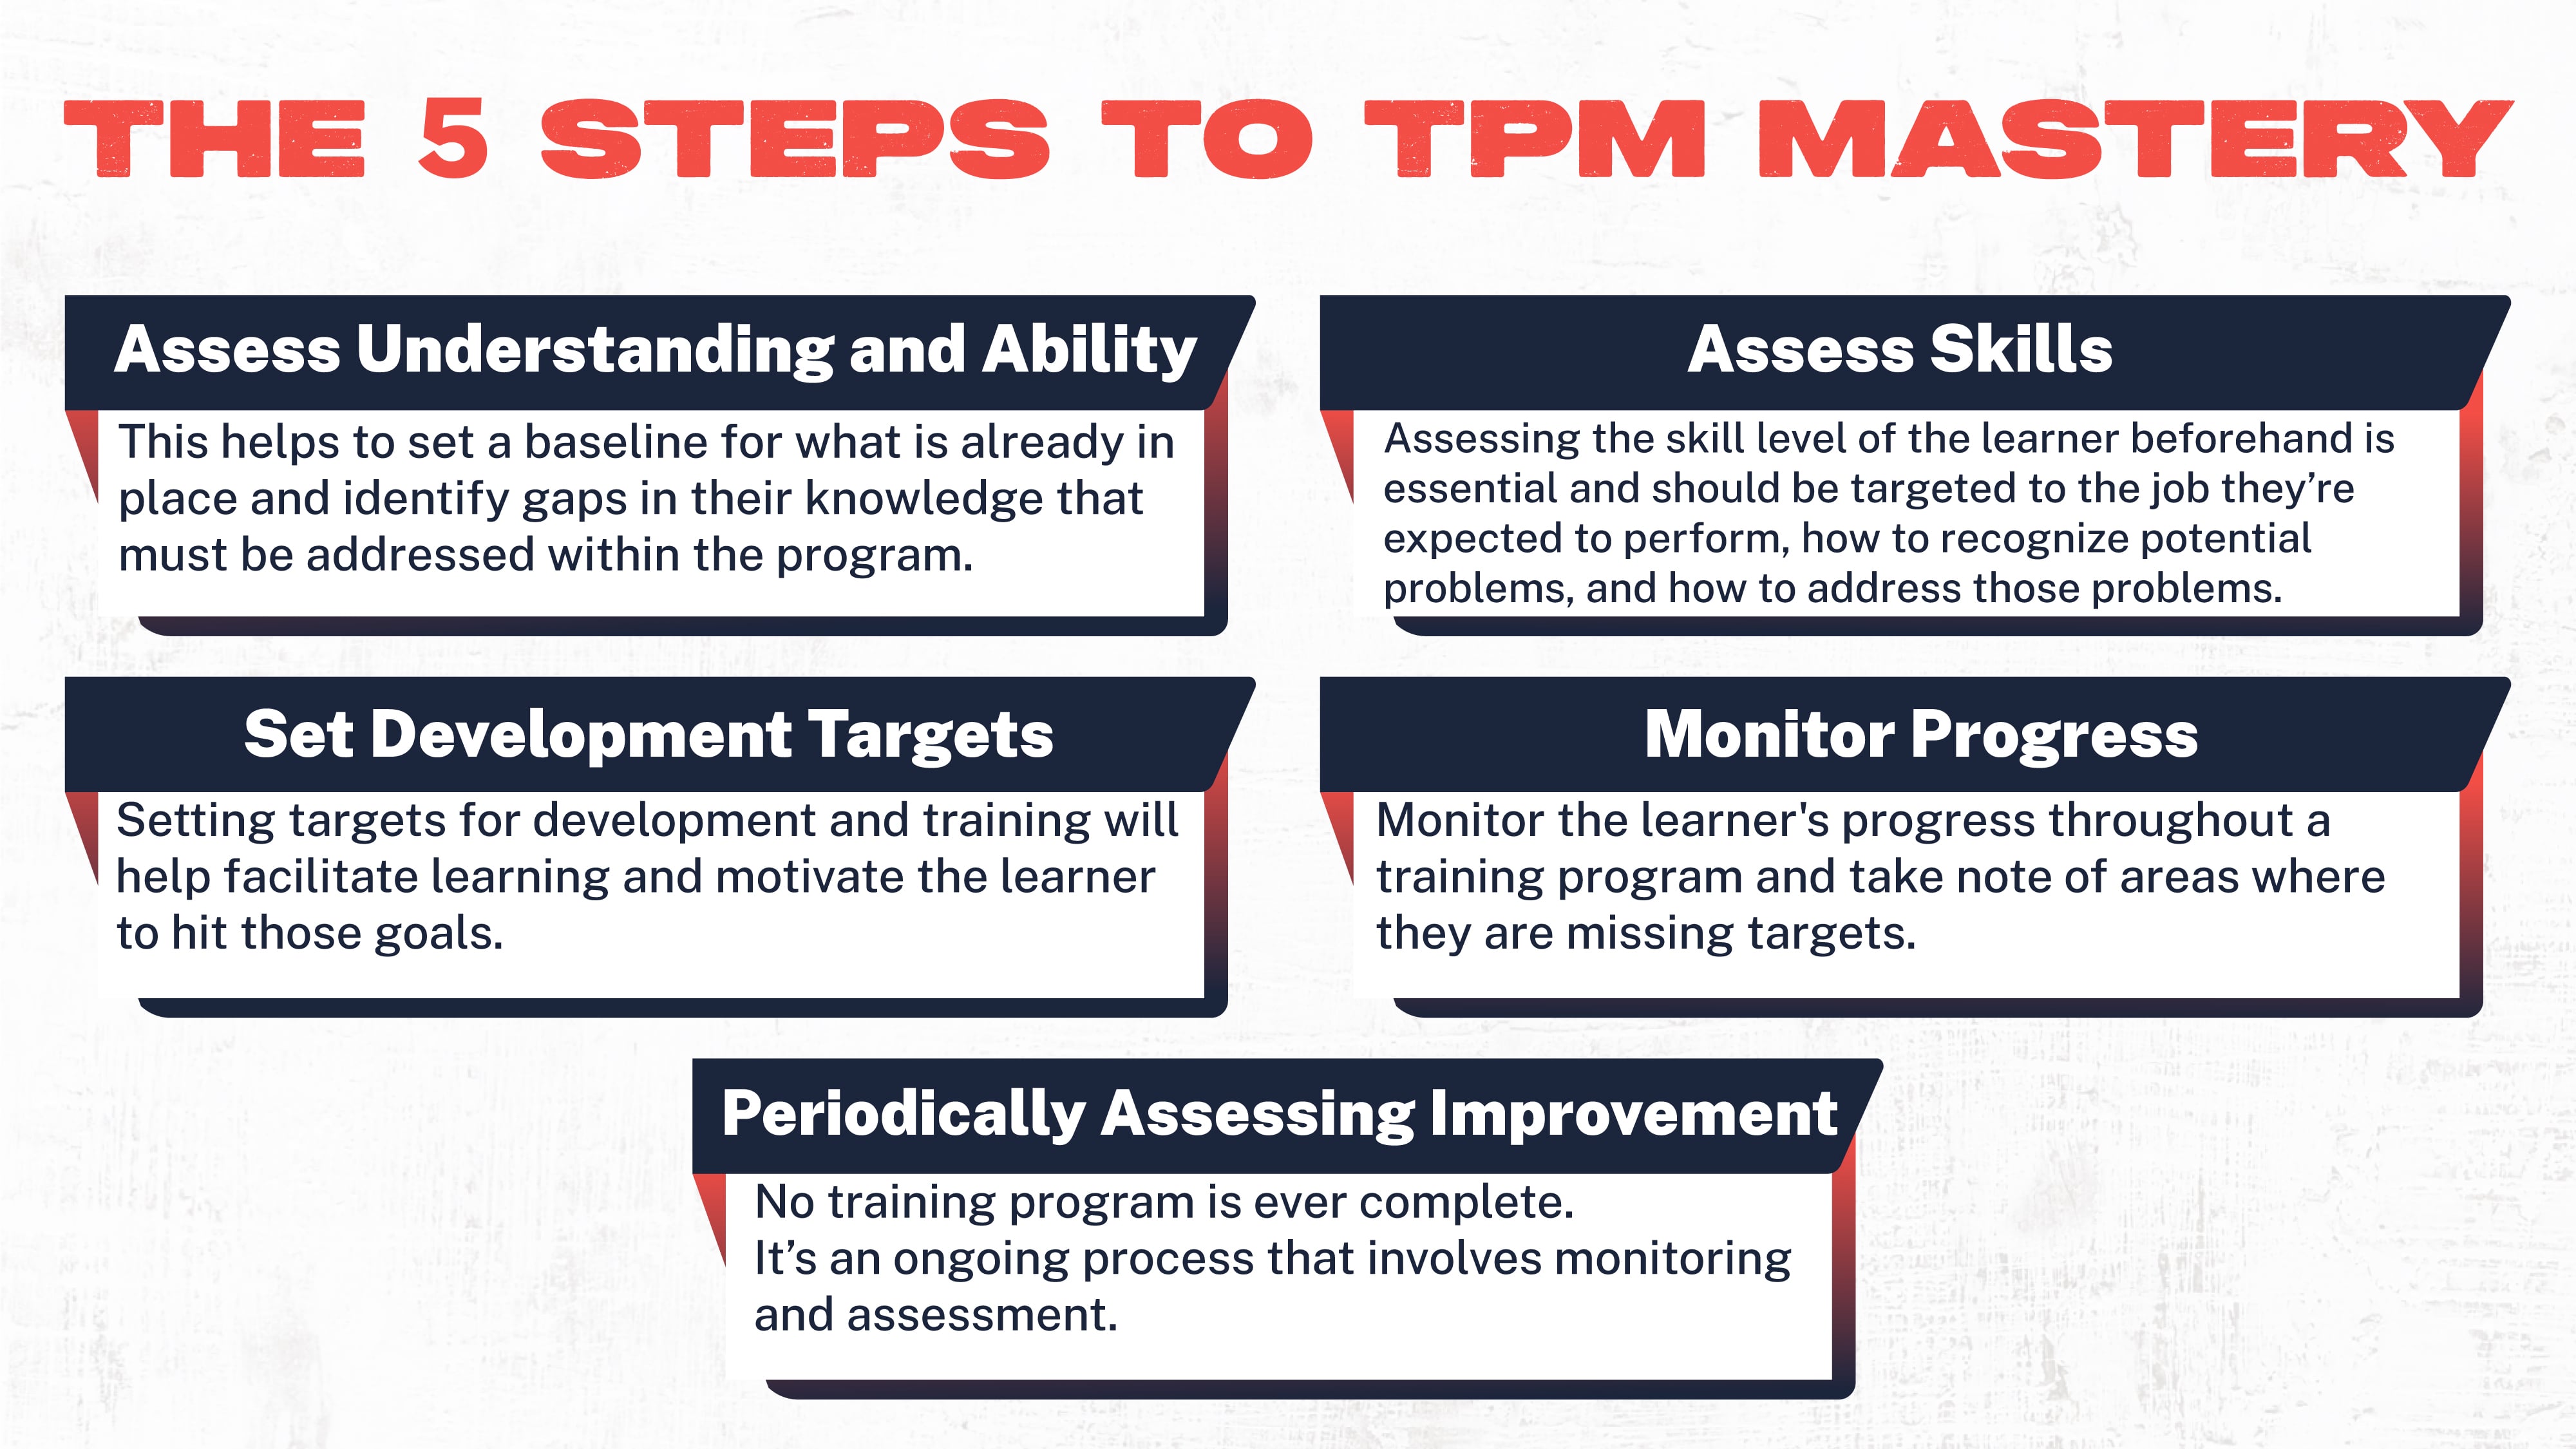 The 5 Steps to TPM Mastery